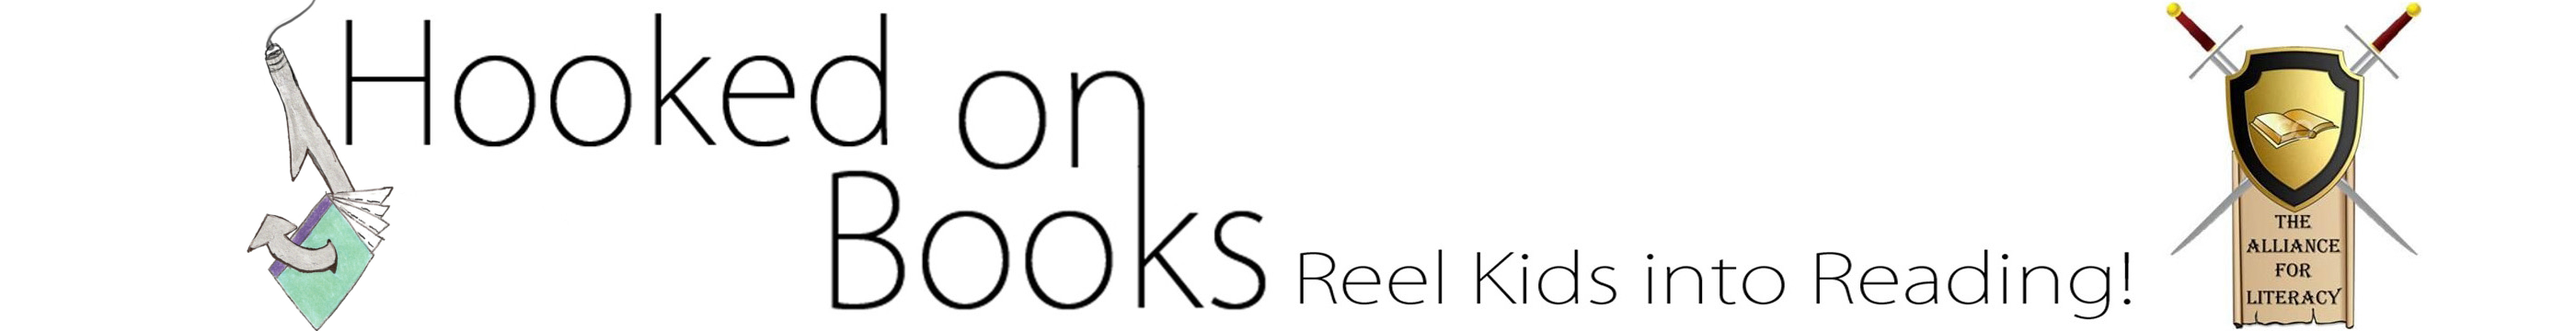 Hooked on Books Banner